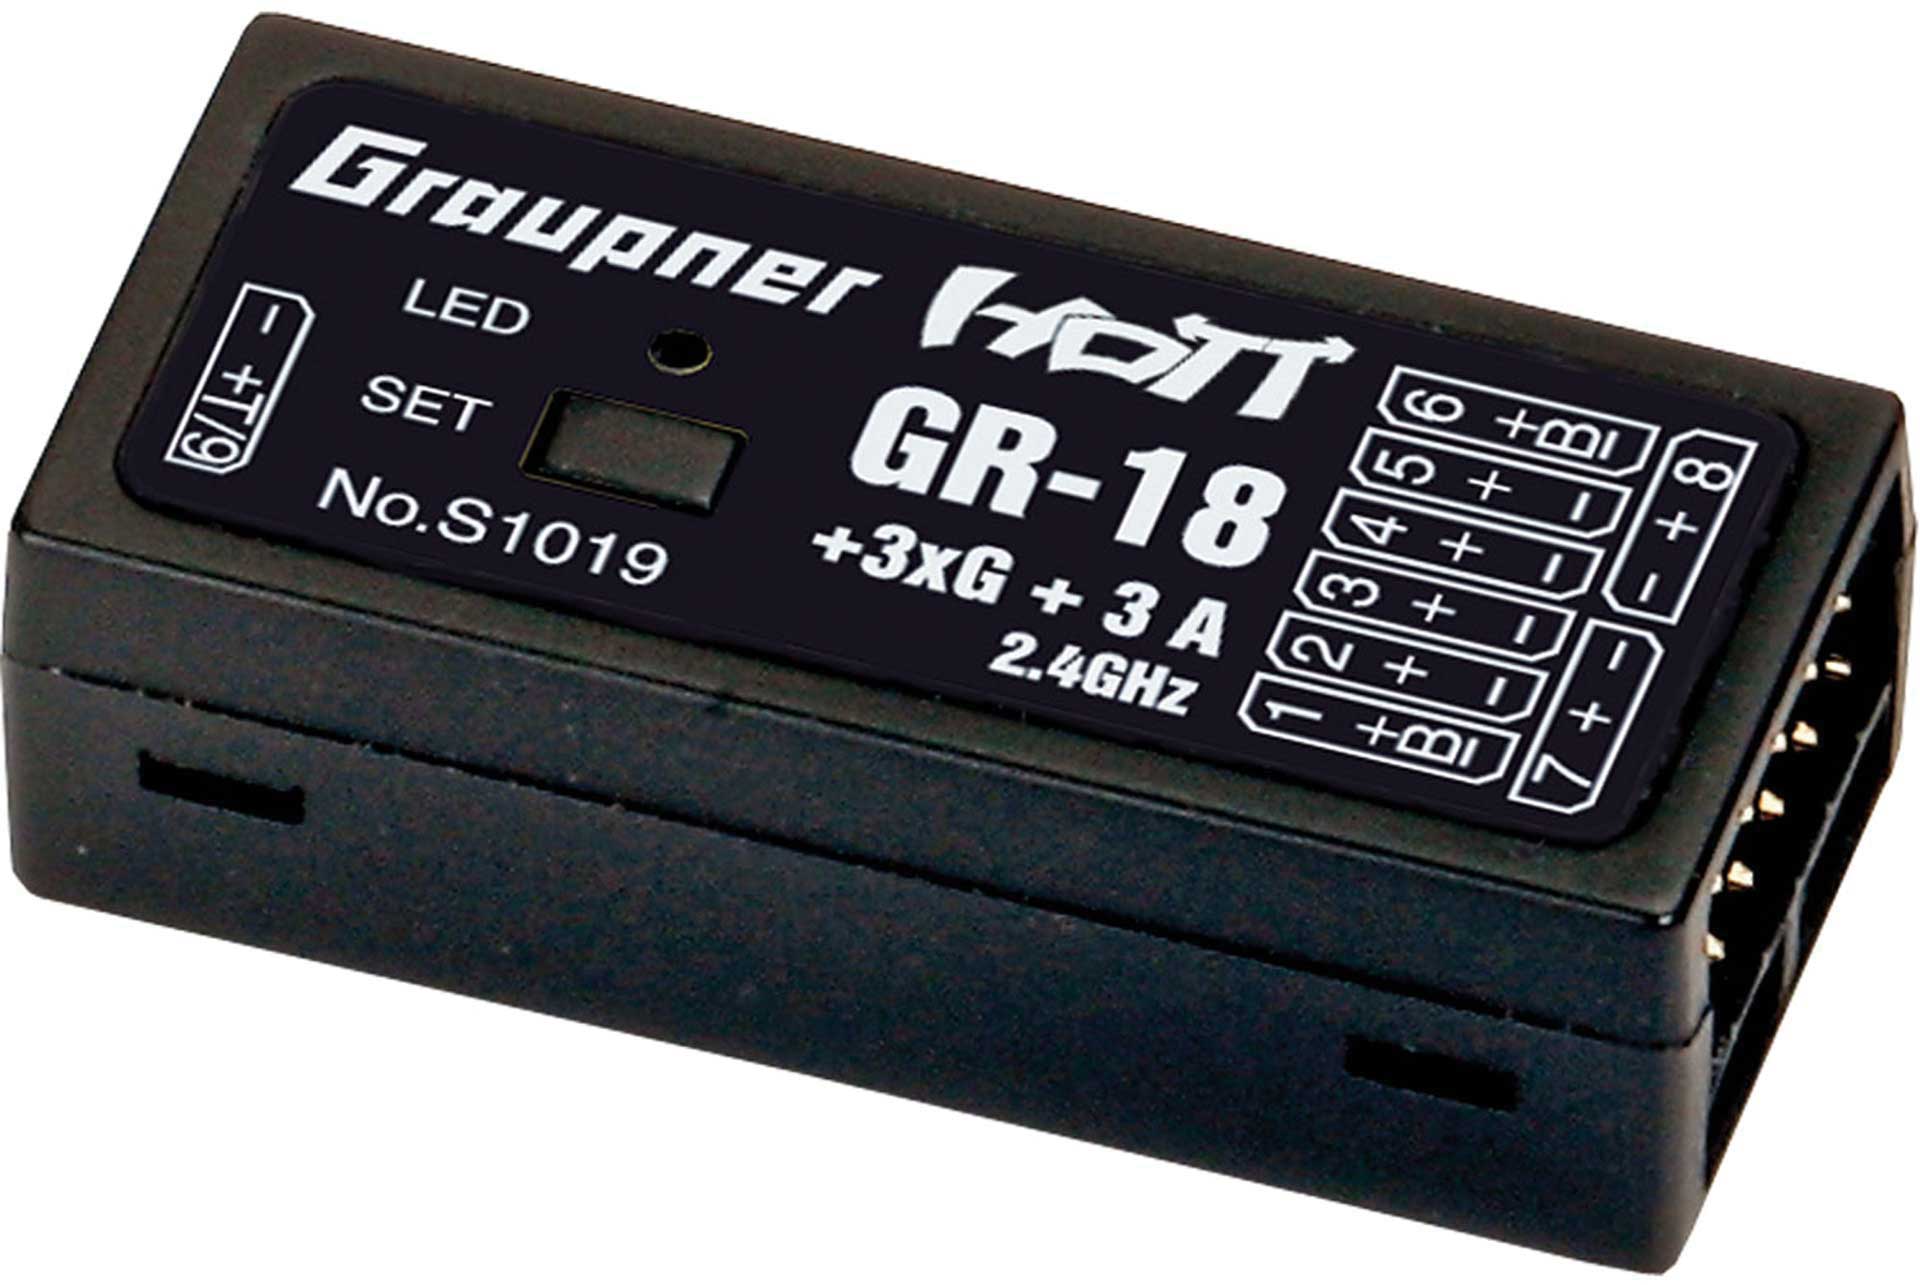 GRAUPNER GR-18 "AIR" + 3XG + 3A integrated flight controller 9 channel HoTT receiver for model aircraft and helicopters